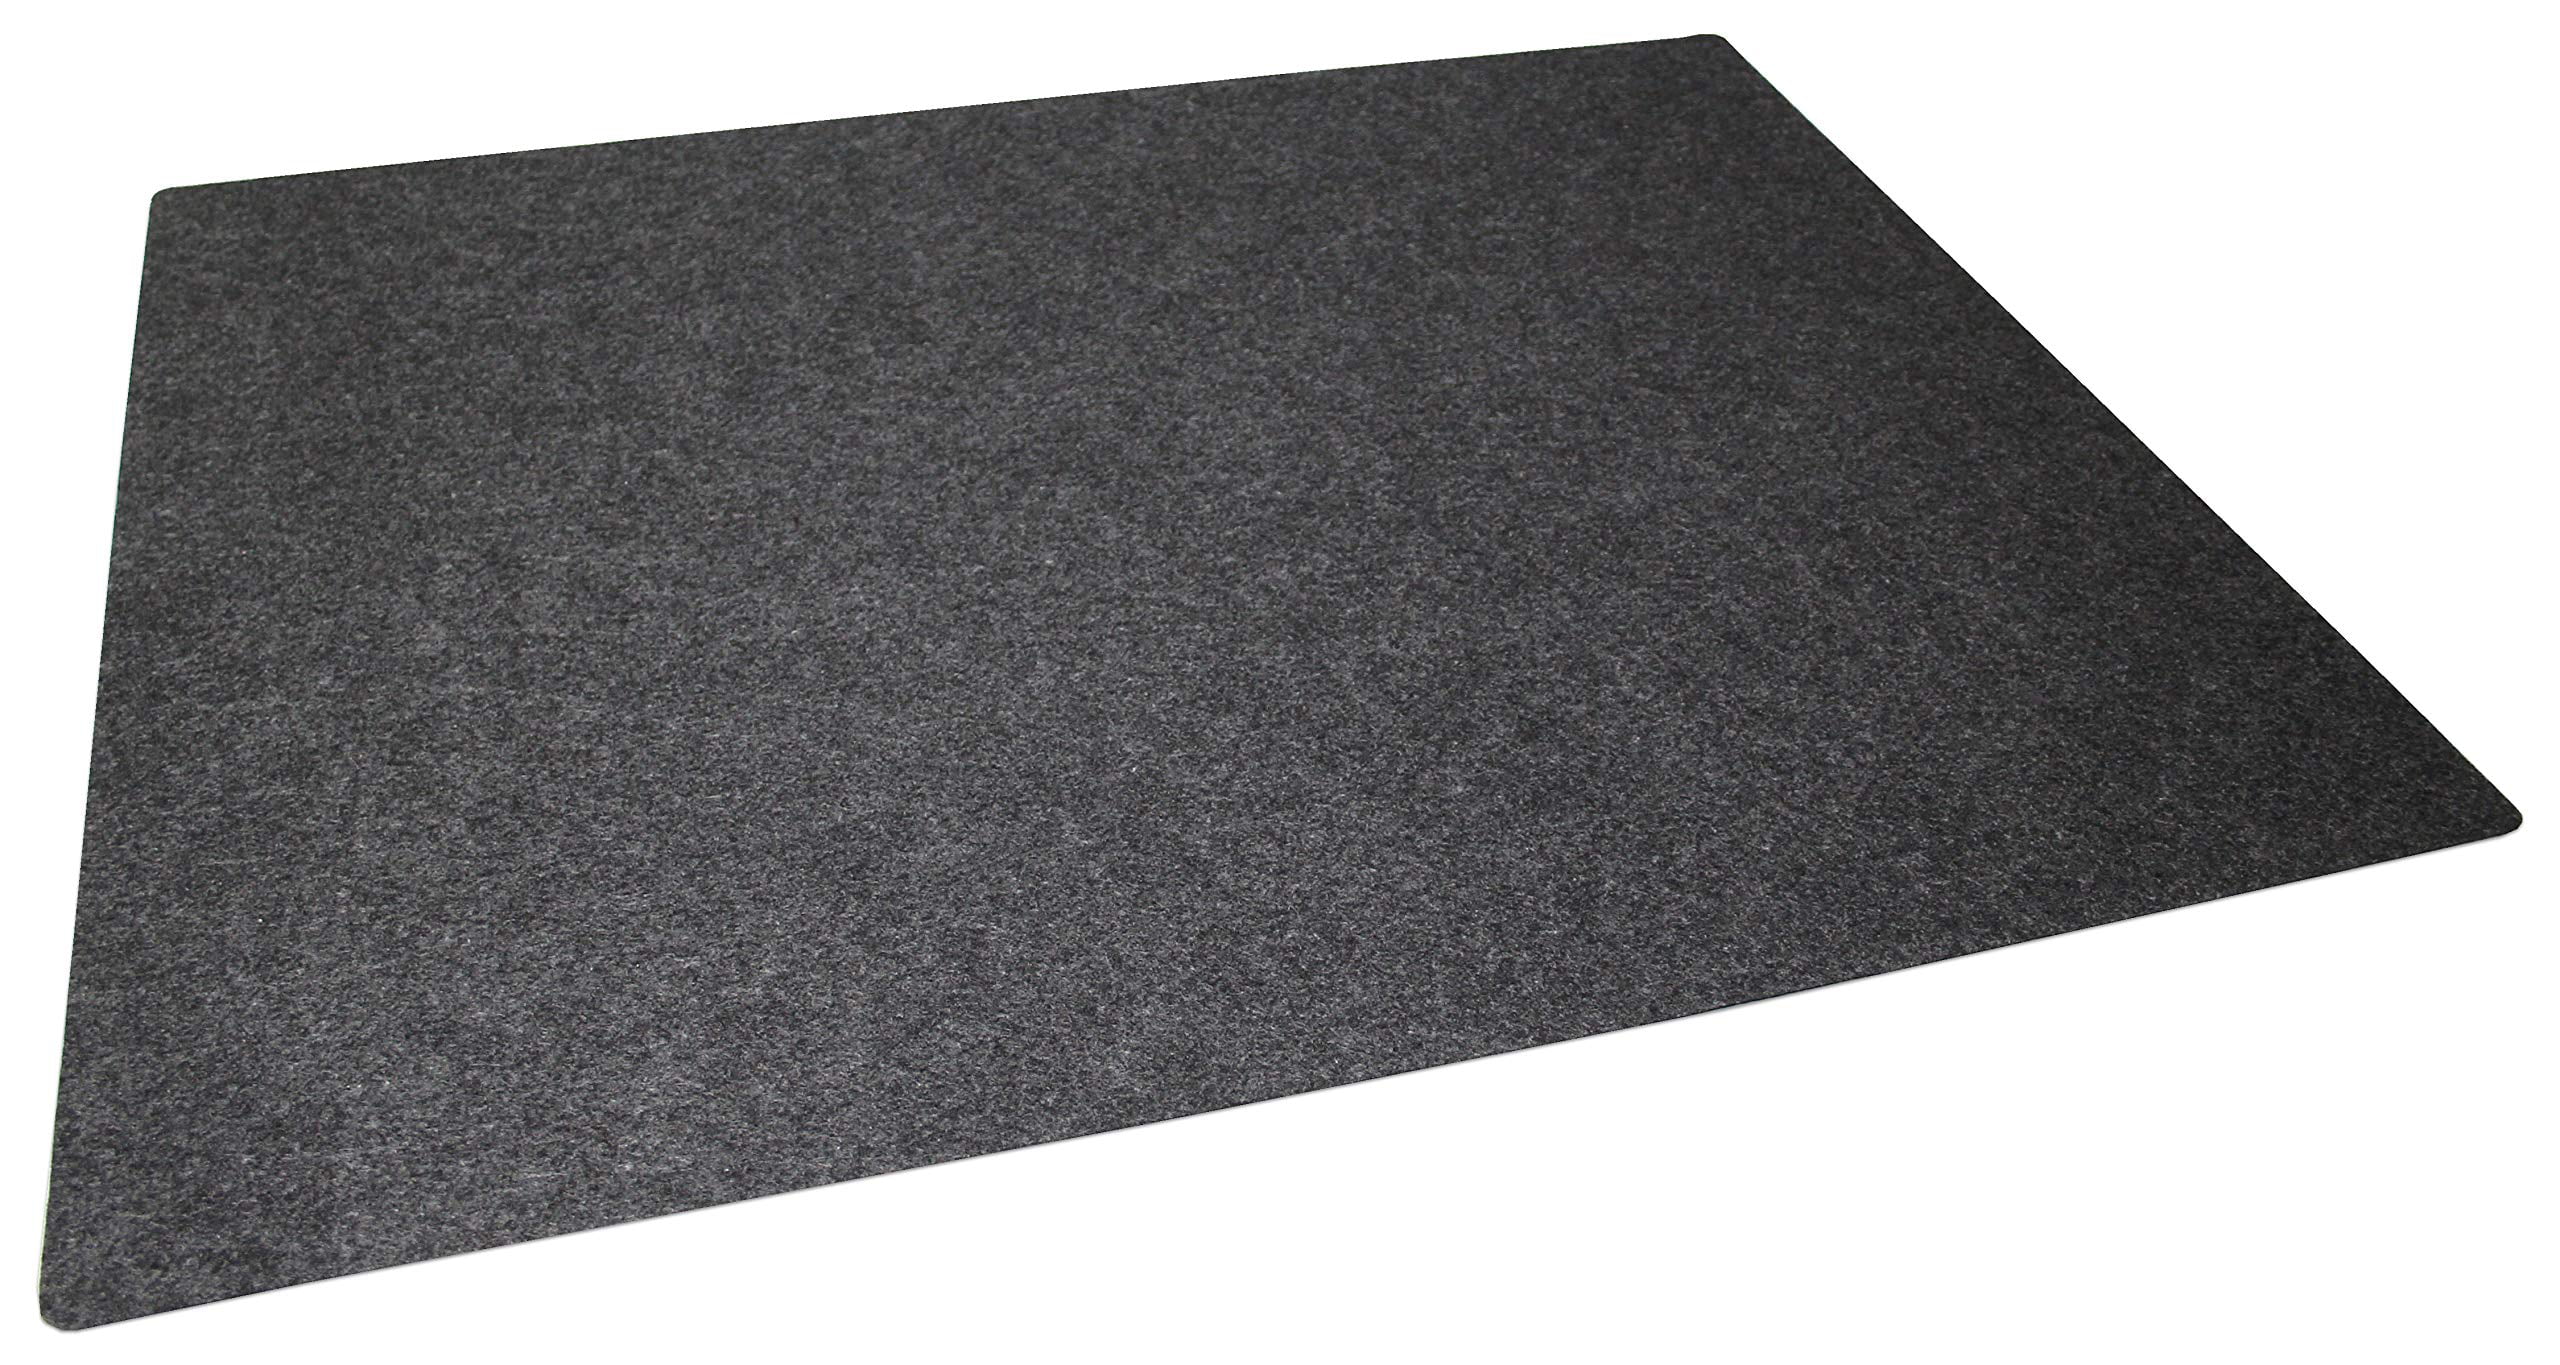 Drymate OSM2936C Large 29 x 36 Spill, Premium Absorbent Mat - Reusable - Oil  Pad Contains Liquids, Protects Garage Floor Surface 